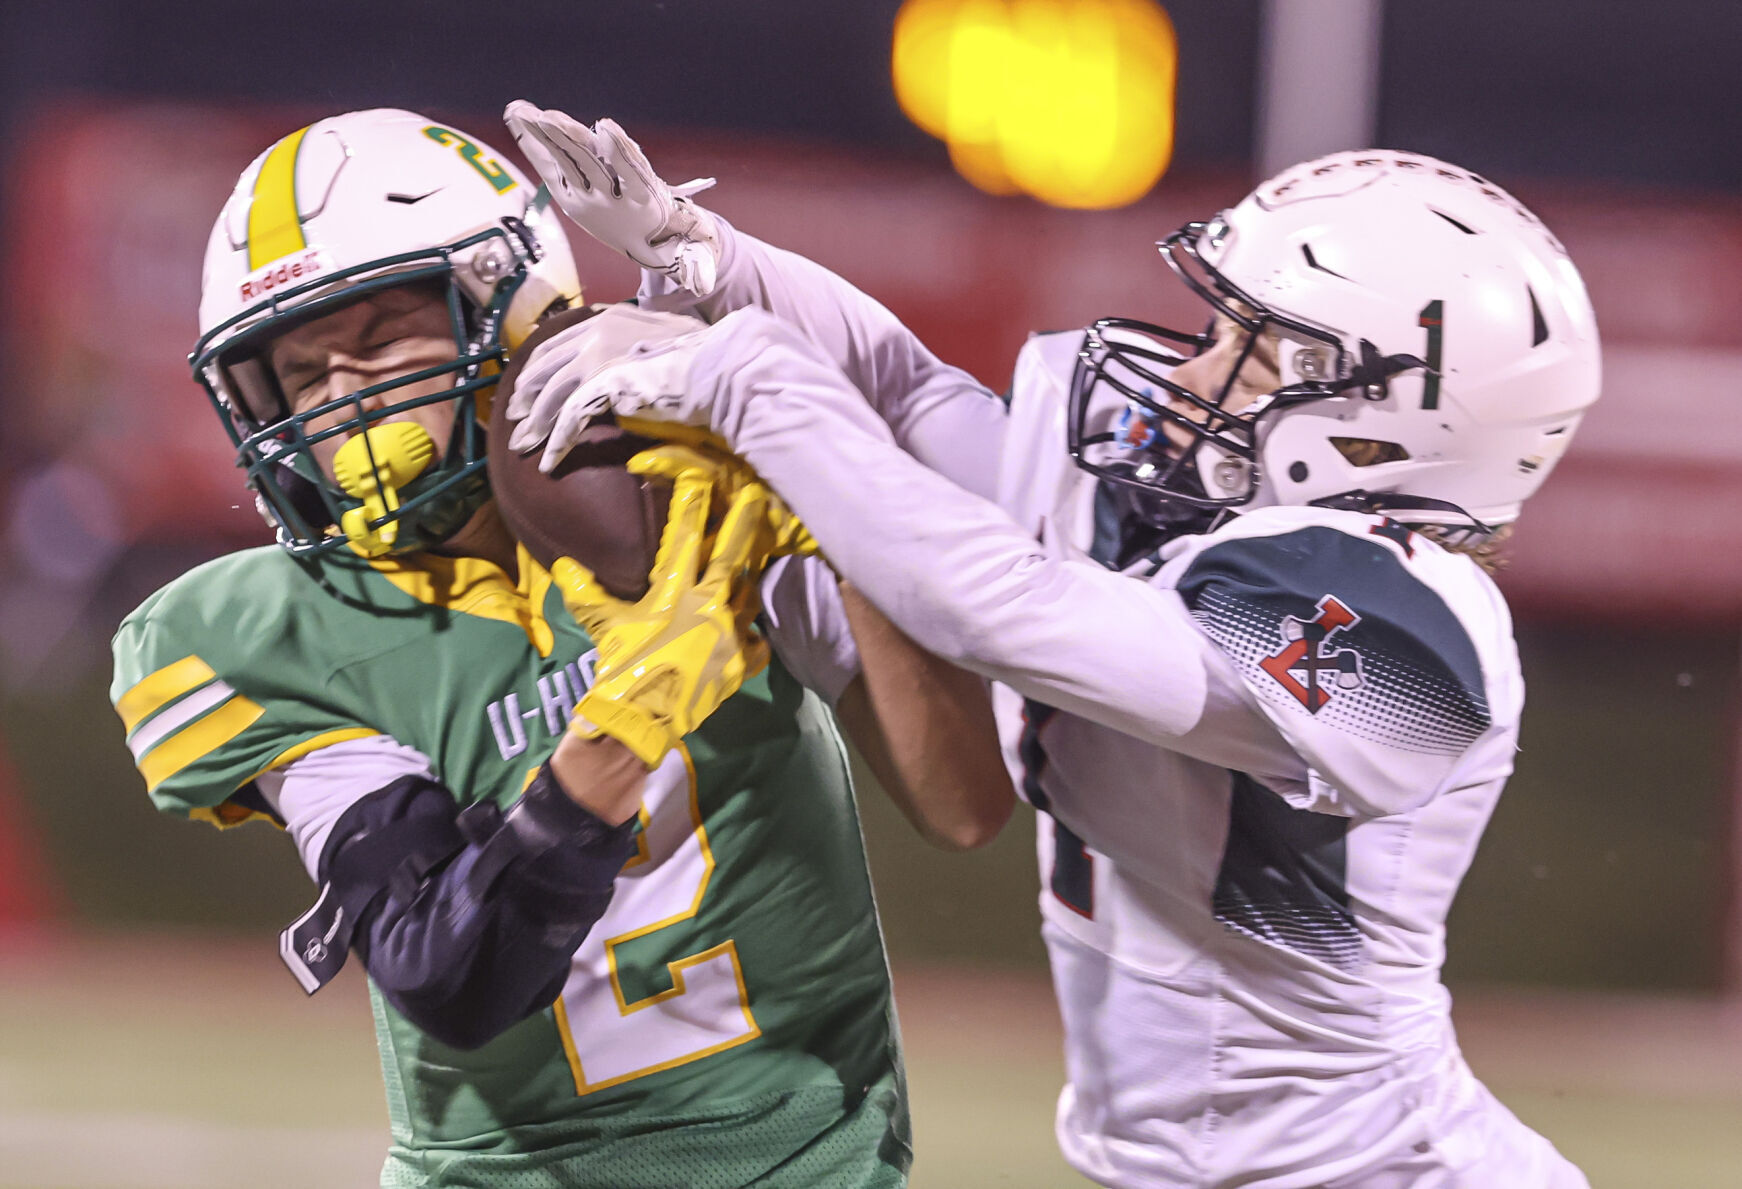 University High School earns playoff berth with dominating victory over Lincoln